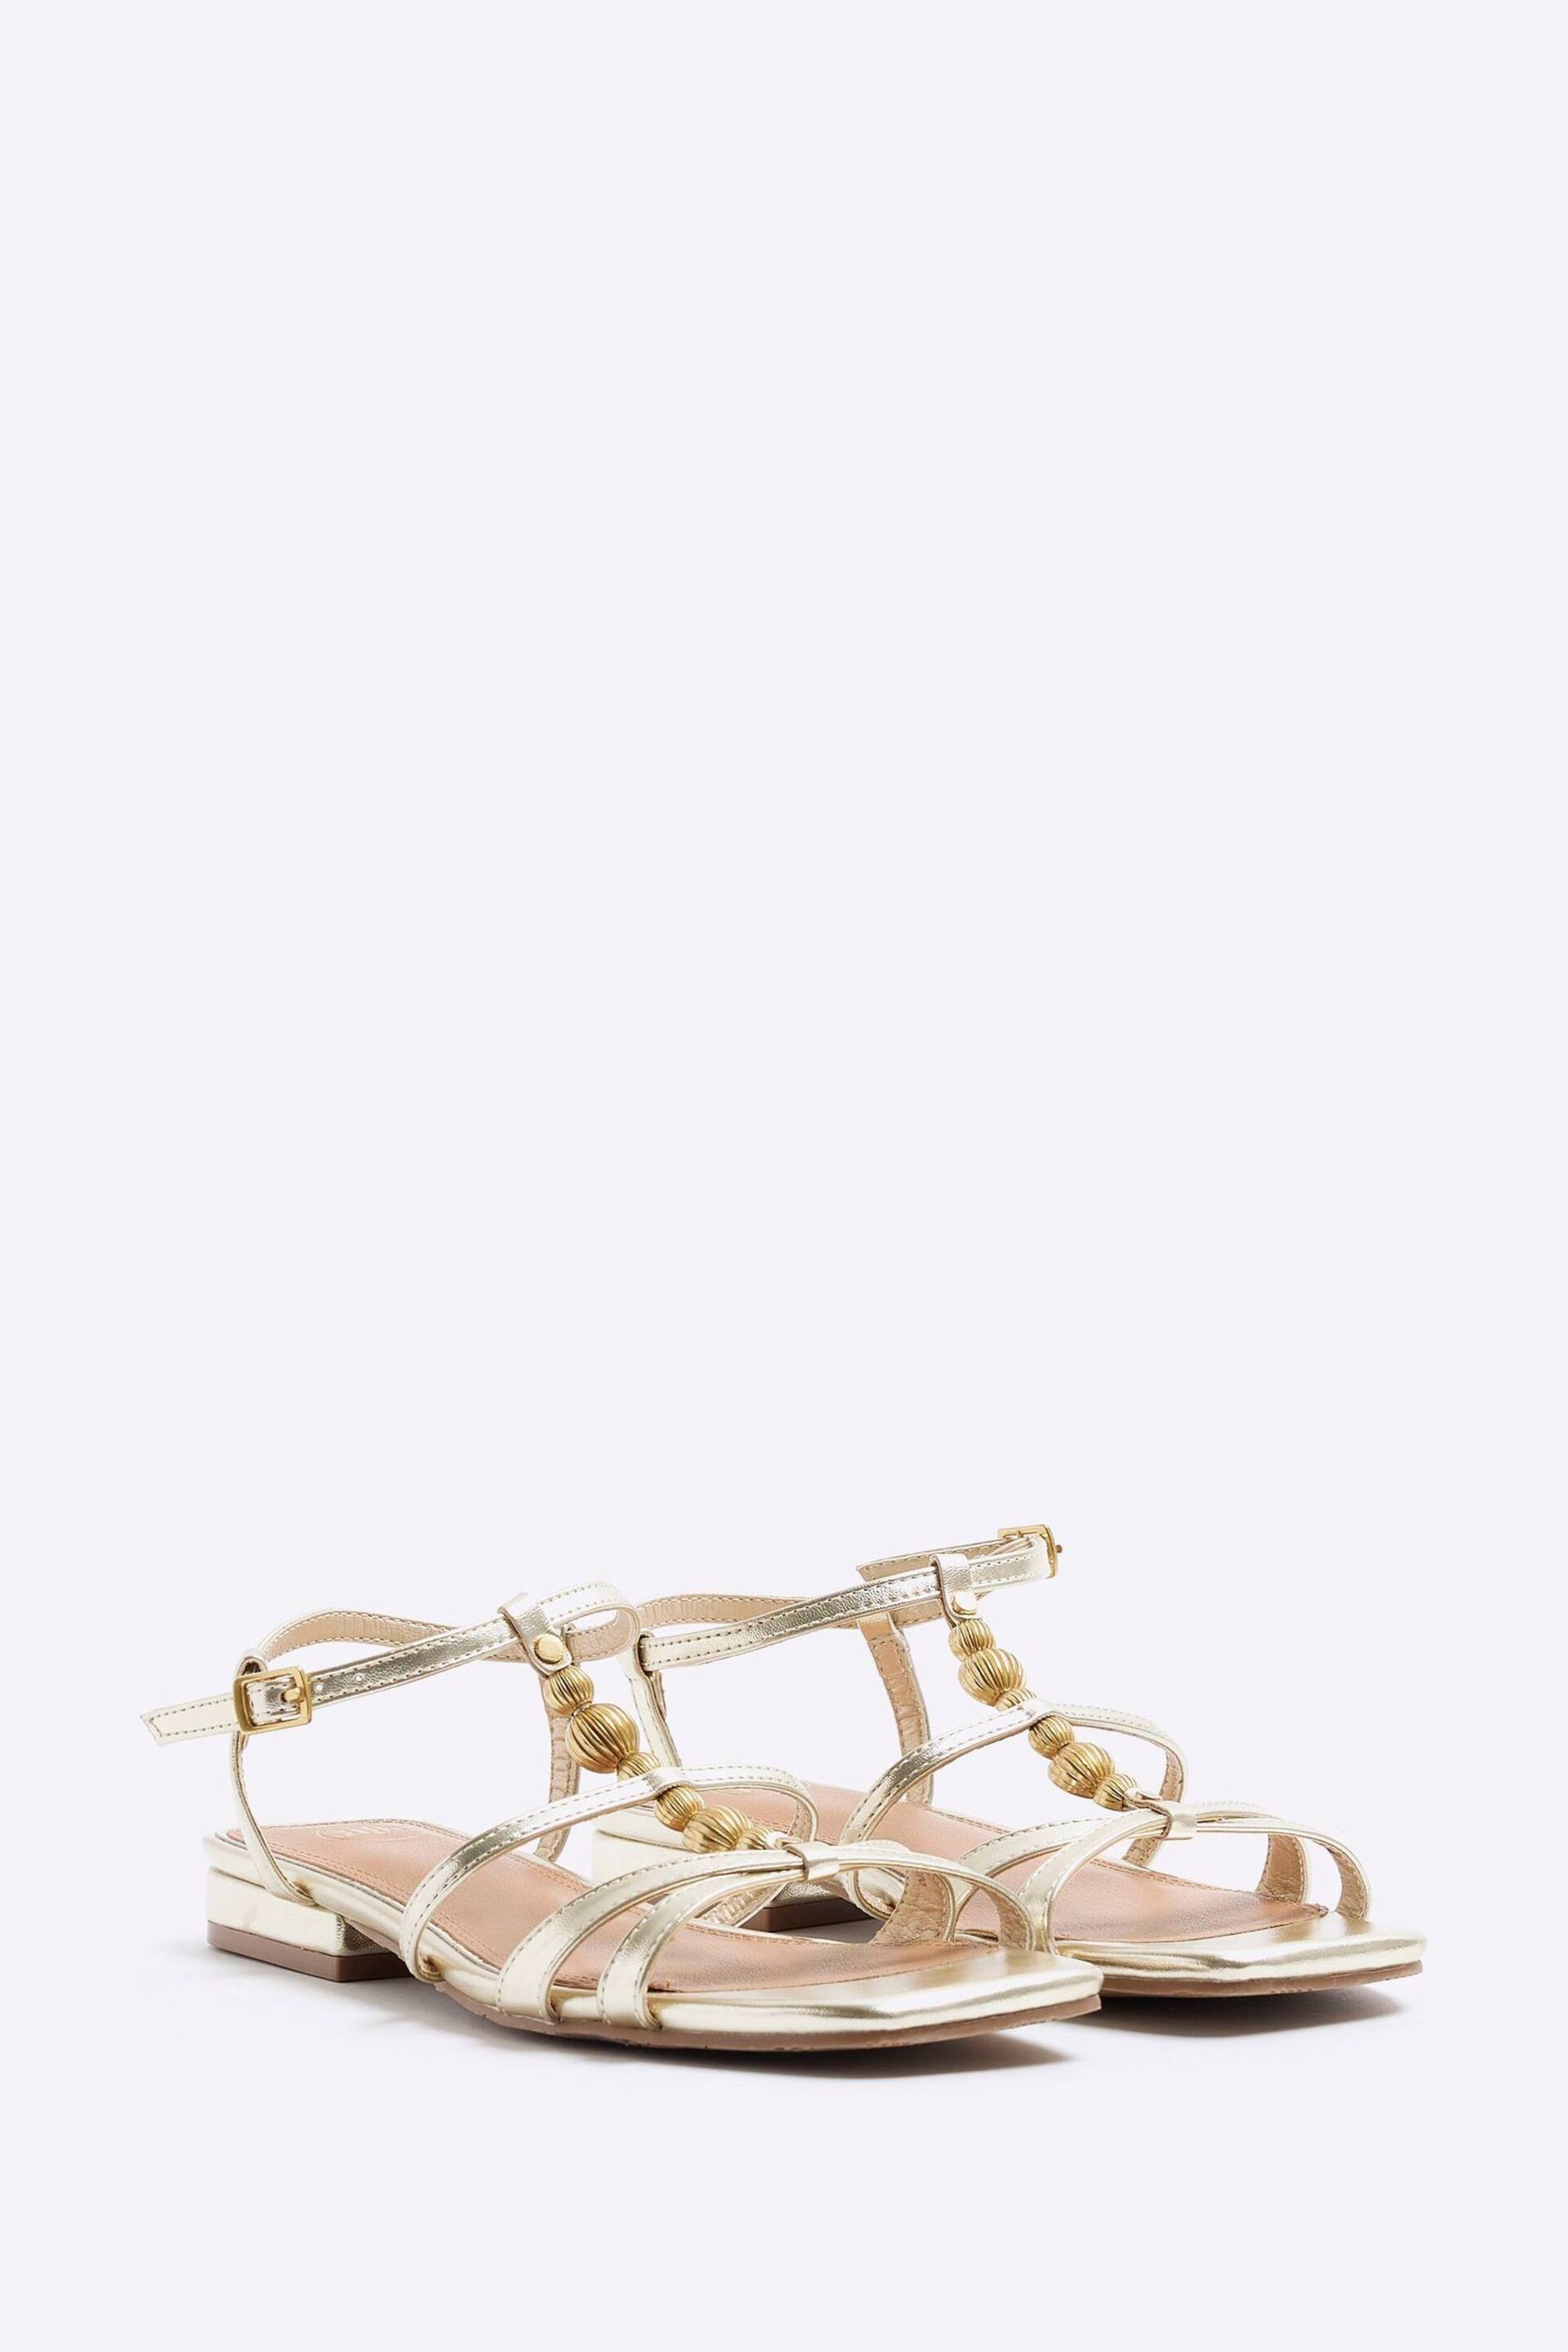 River Island Gold Beaded Flat Sandals - Image 2 of 4